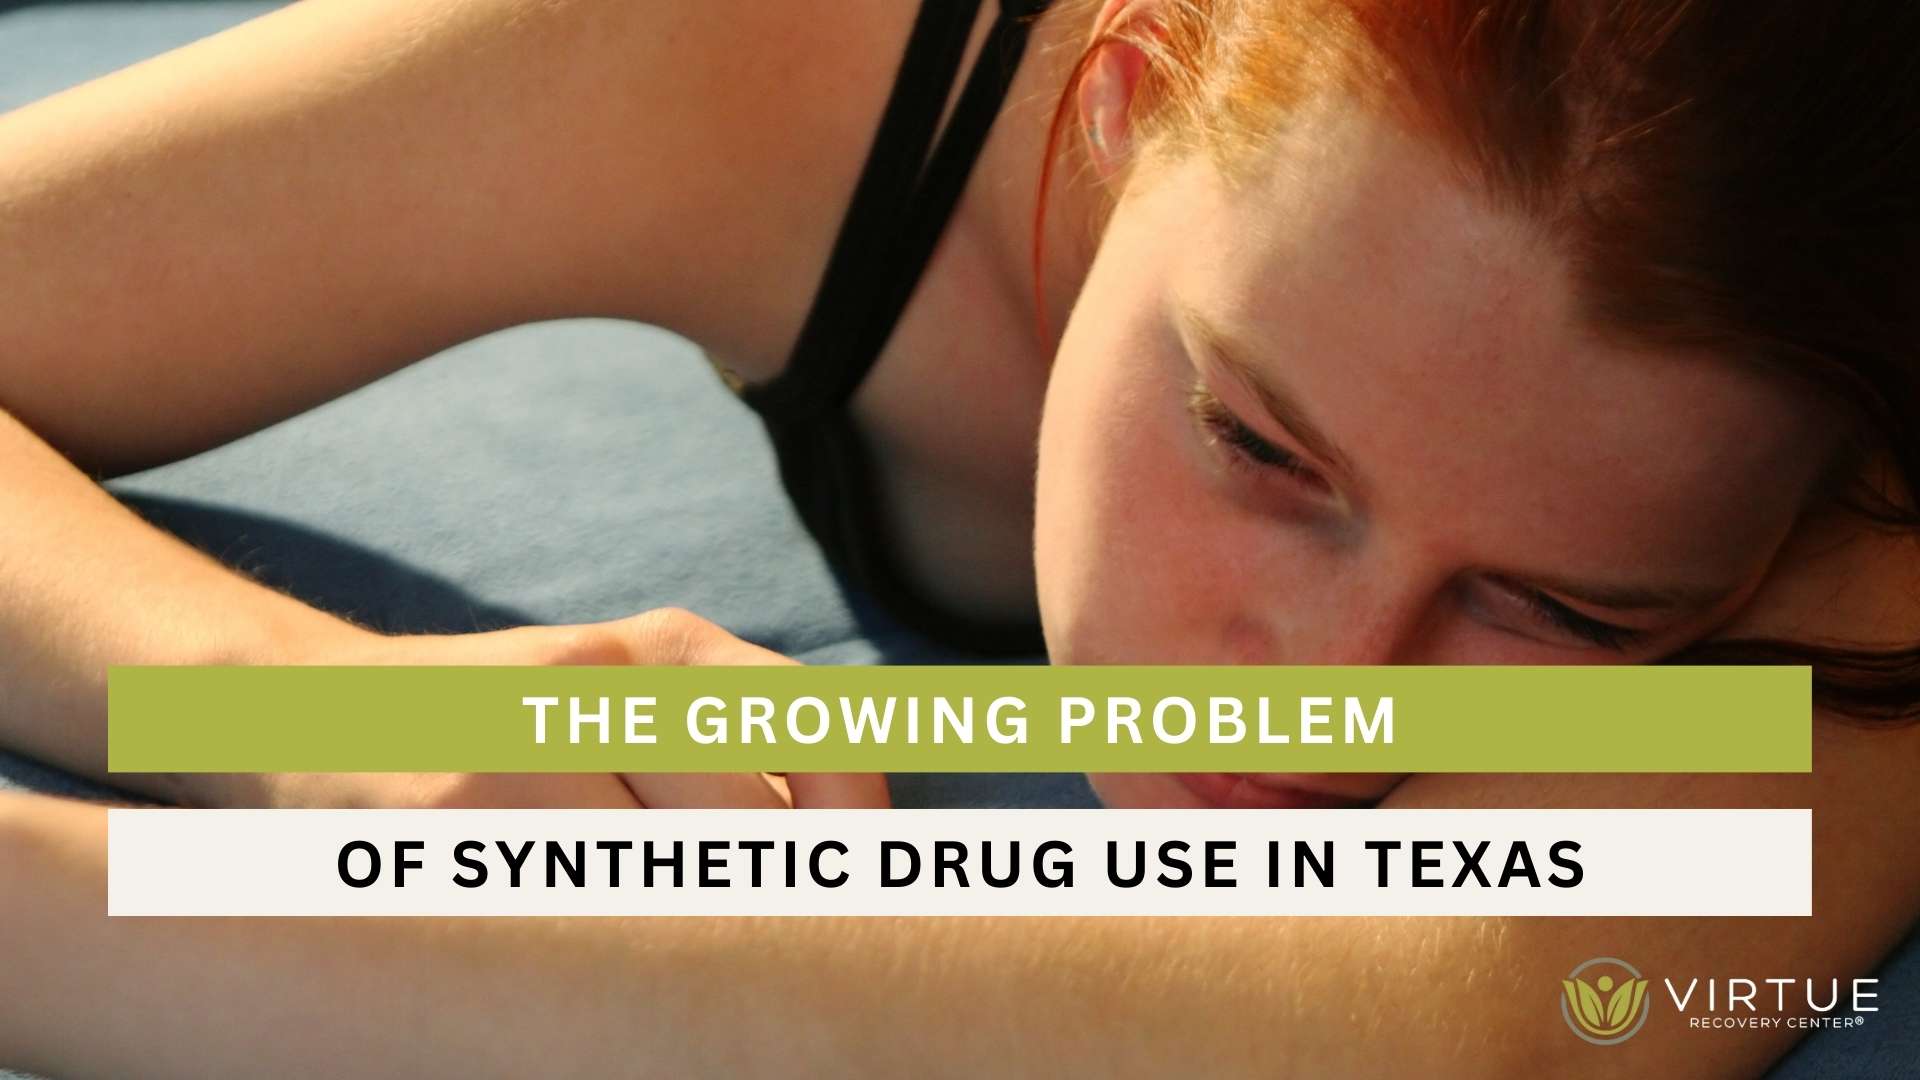 The Growing Problem of Synthetic Drug Use in Texas